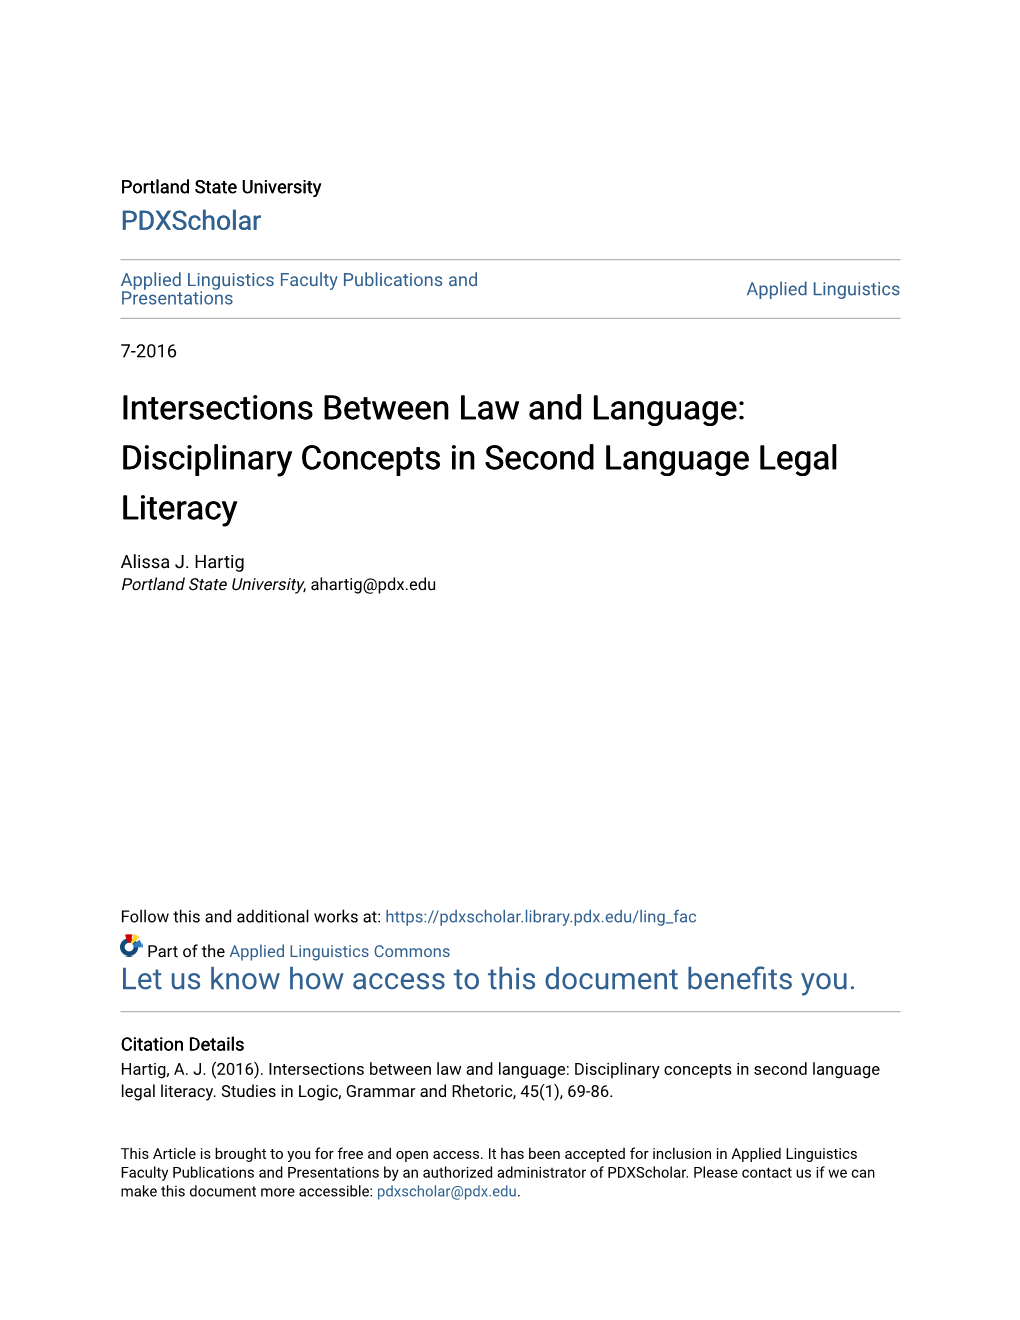 Intersections Between Law and Language: Disciplinary Concepts in Second Language Legal Literacy